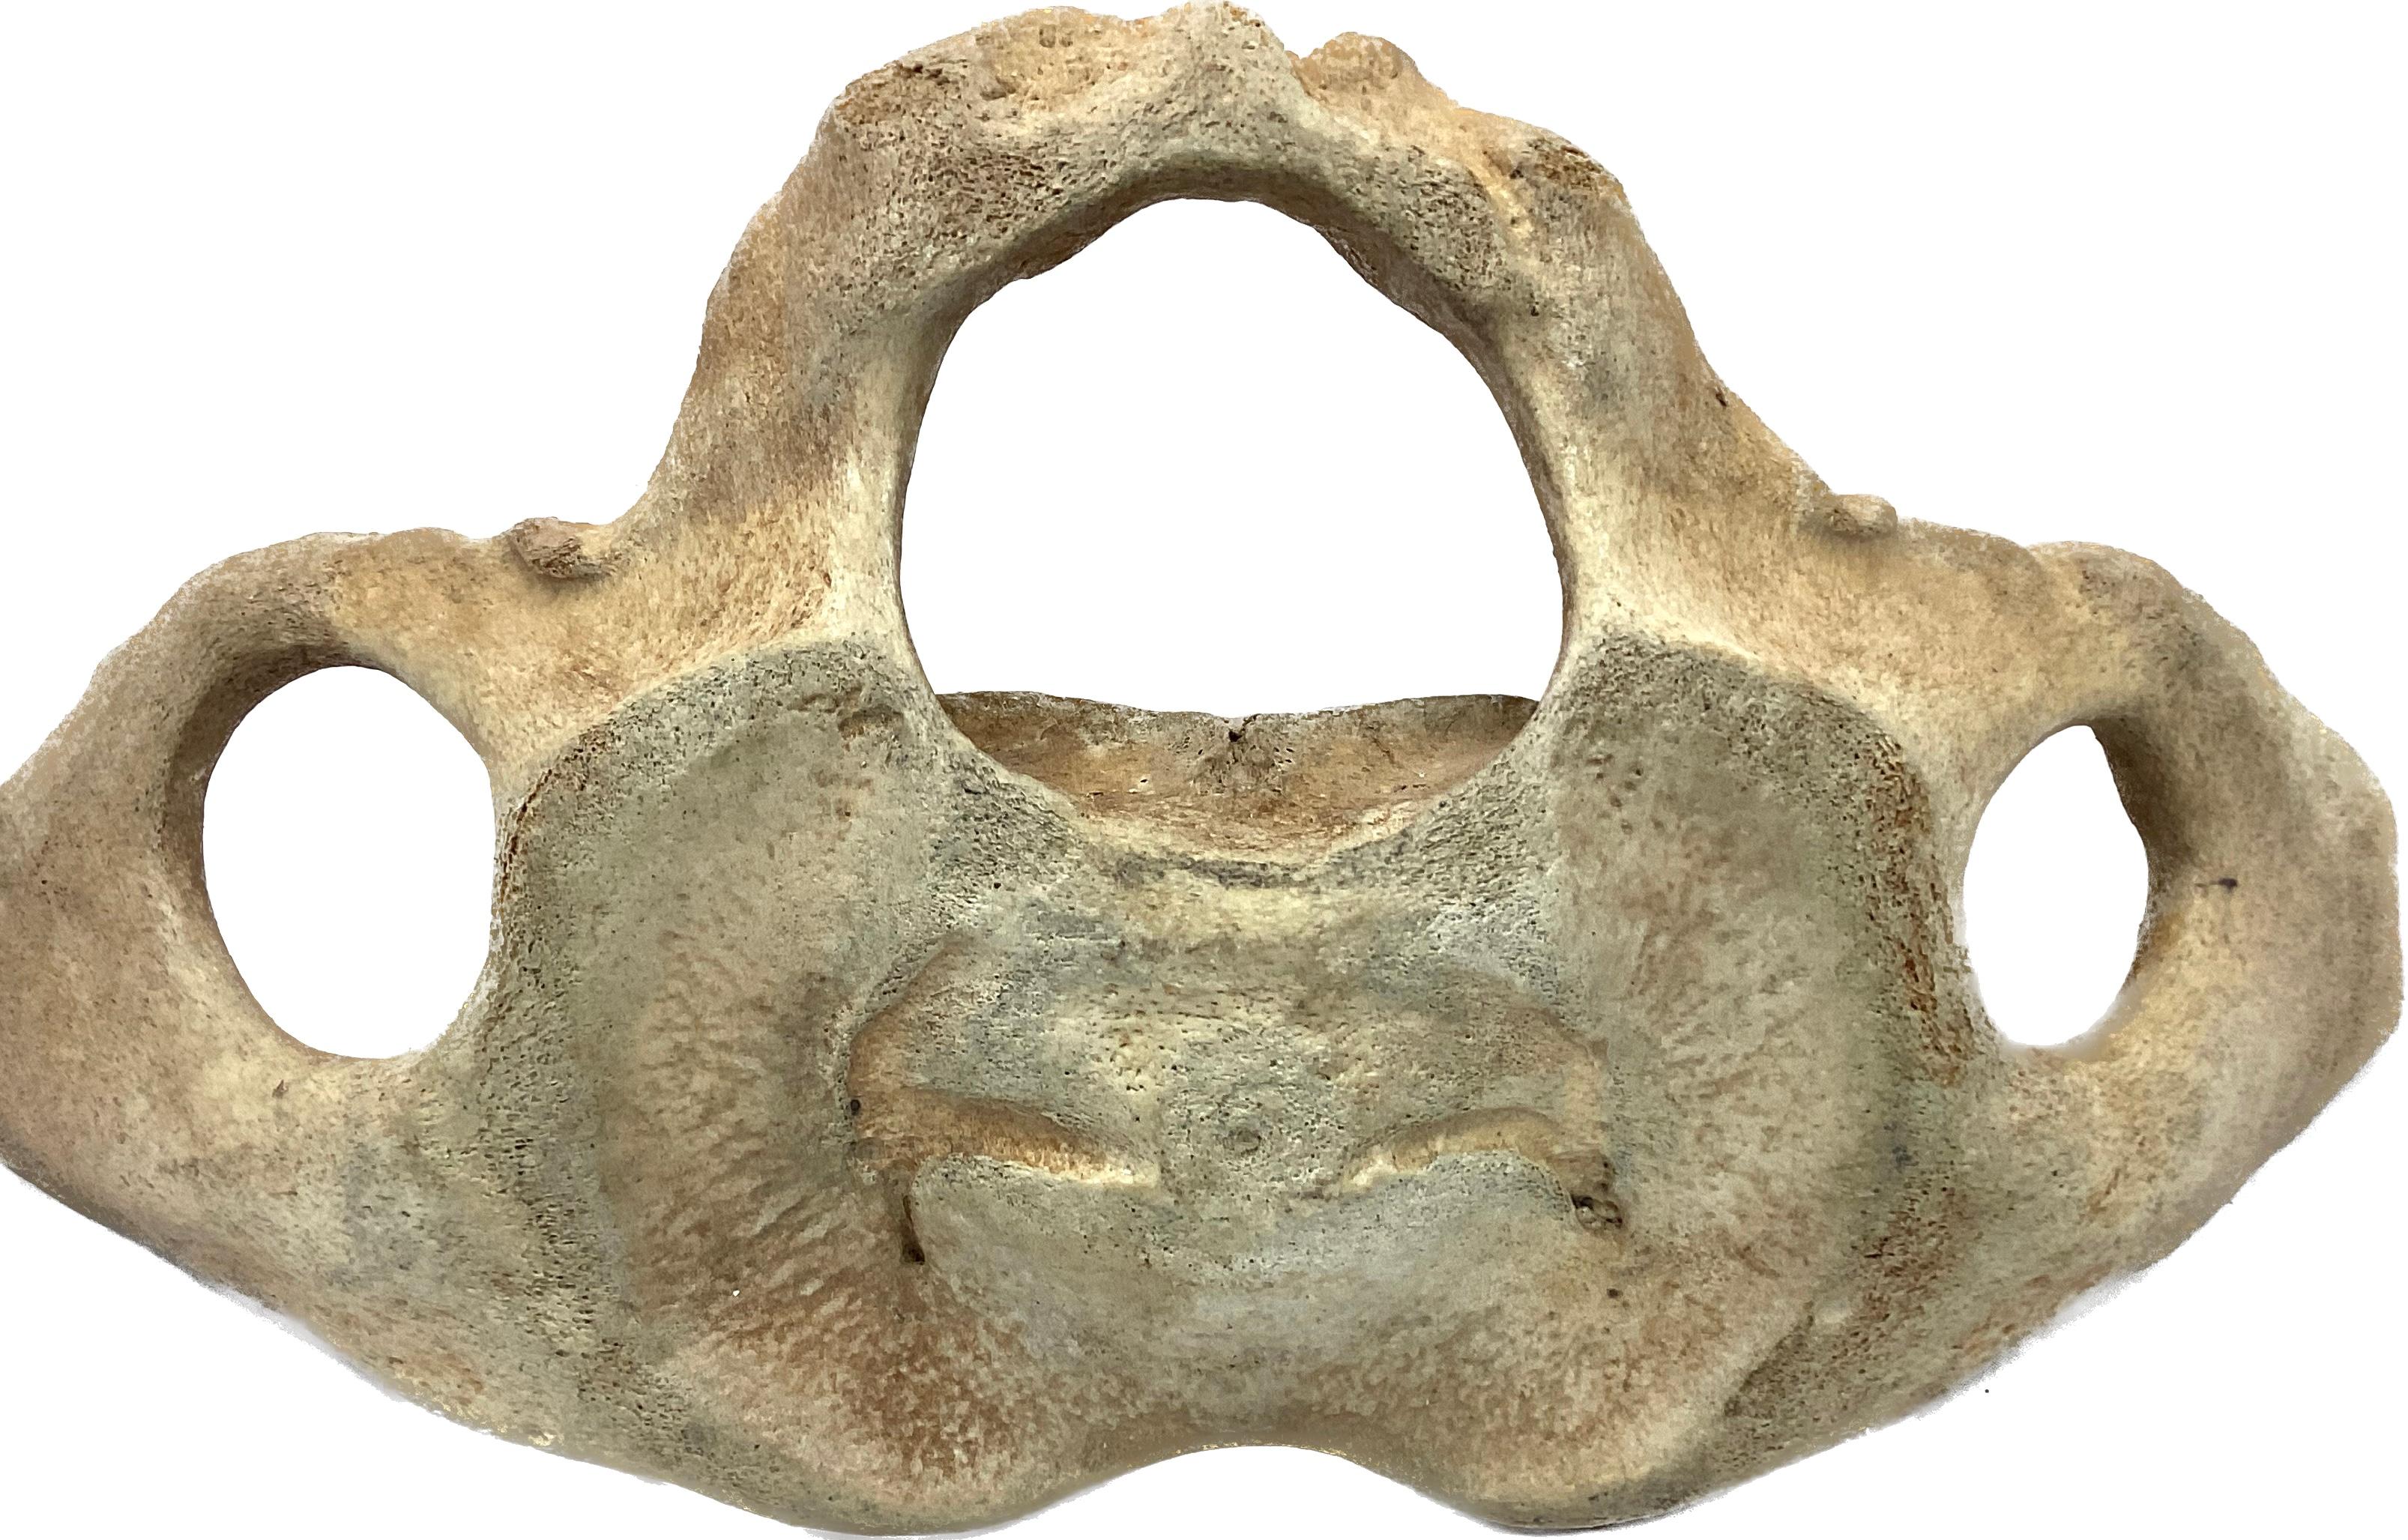 Natural weathered antique Whale Vertebrae bone in beautiful naturally aged old surface. One section / specimen. Fantastic old natural history item. Likely 19th century.